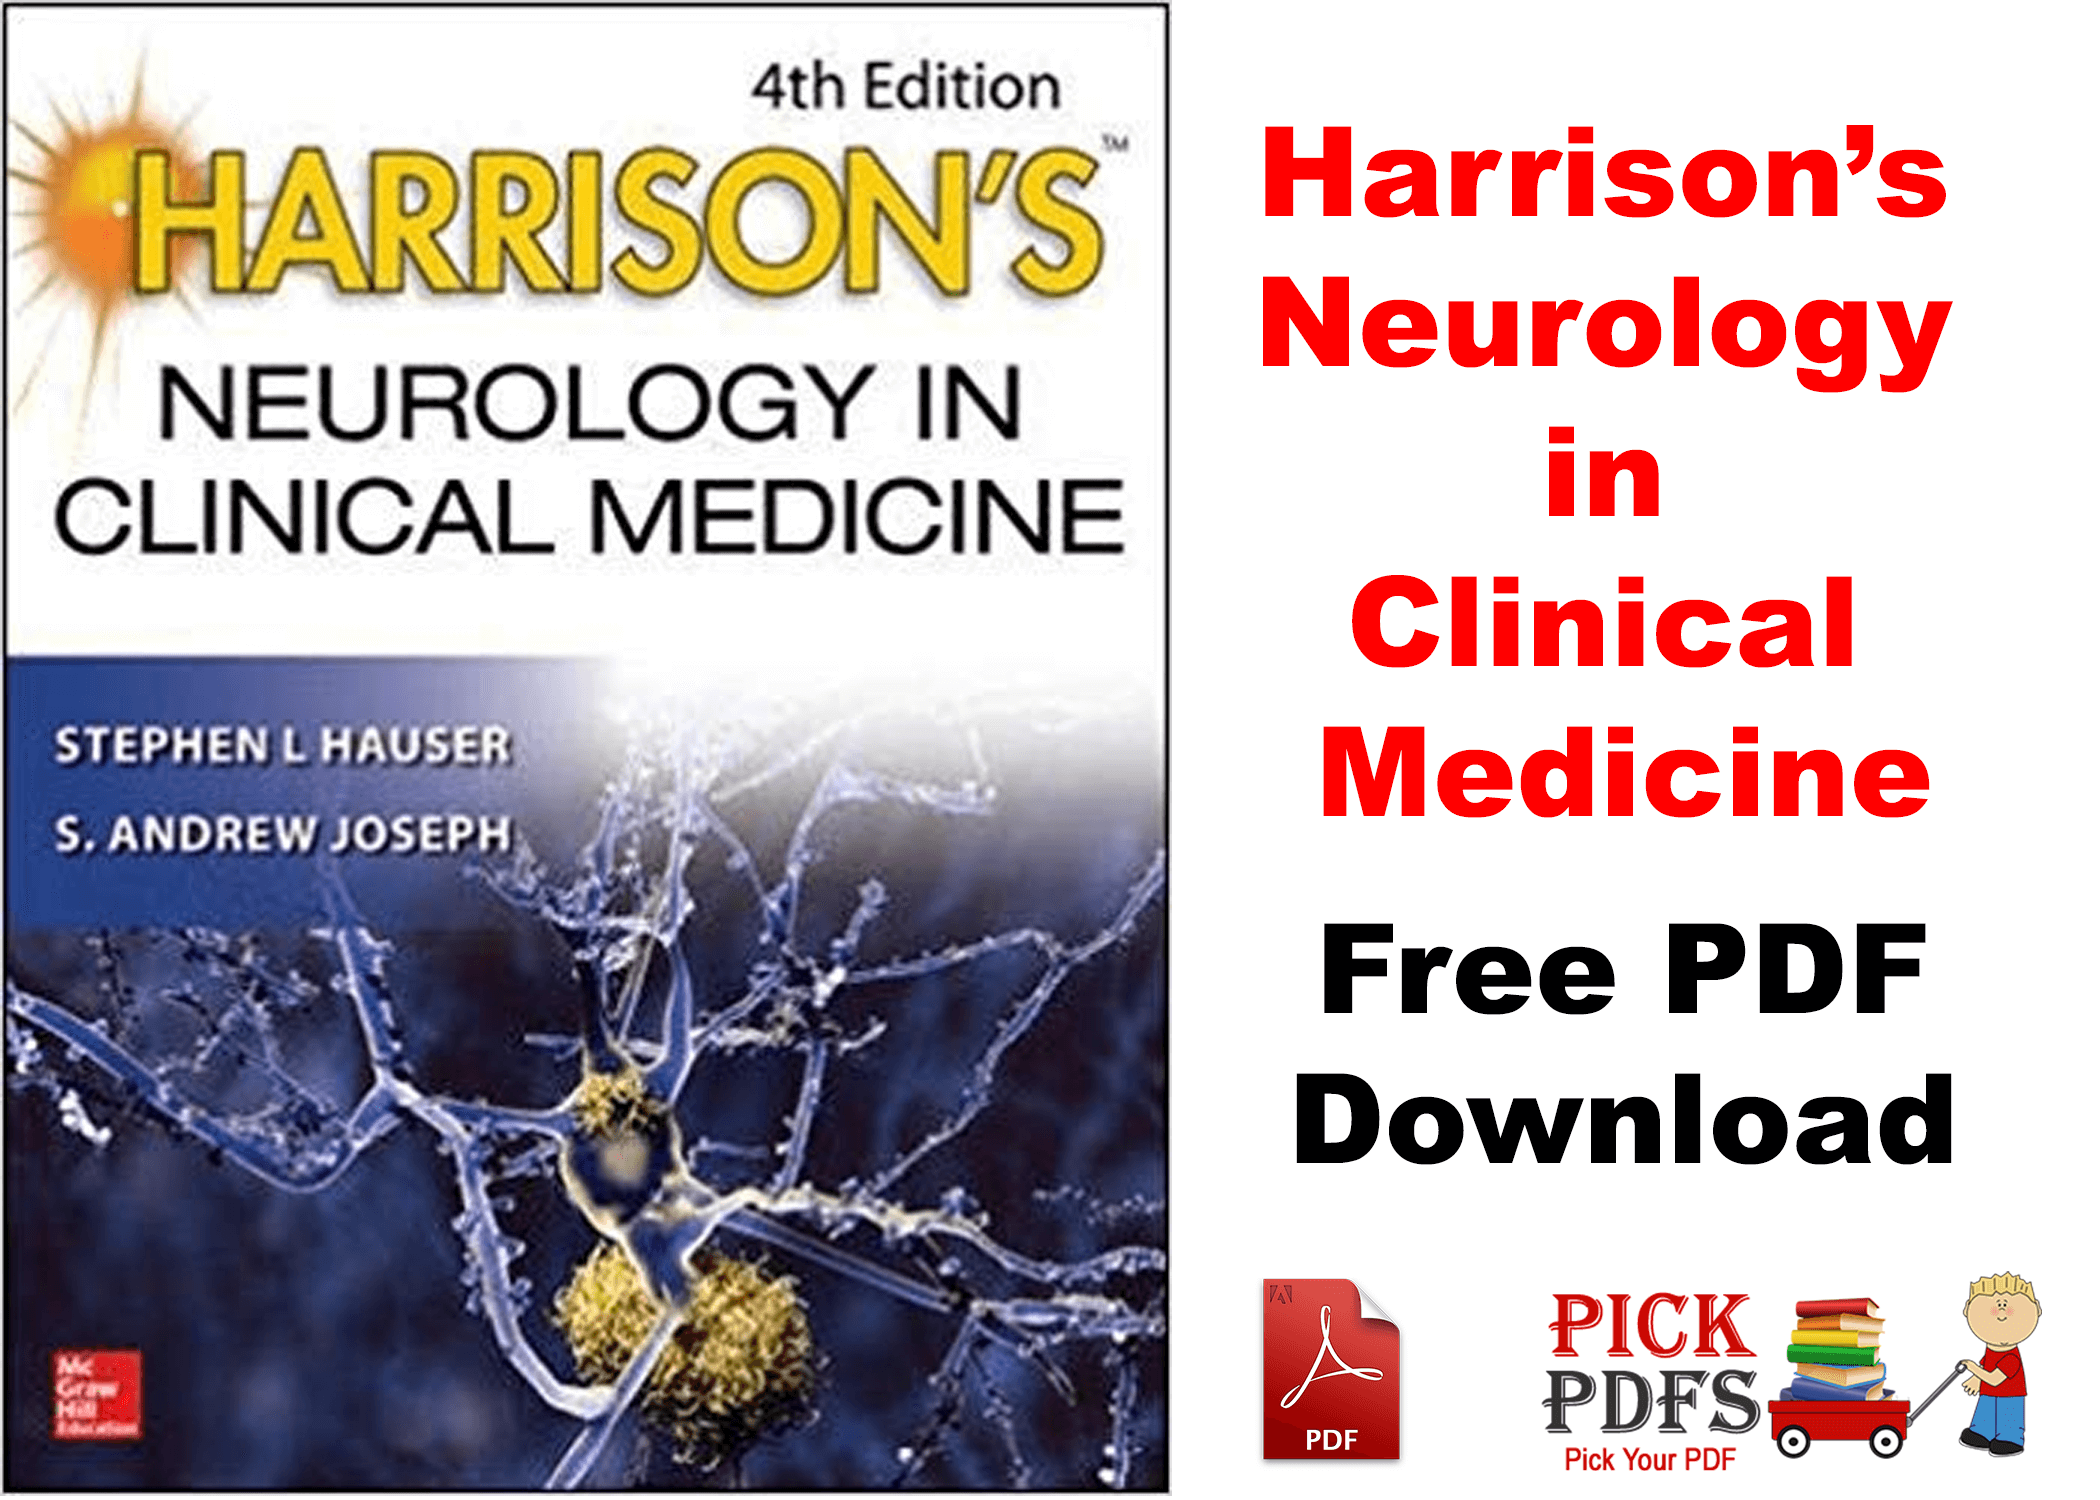 https://pickpdfs.com/download-current-diagnosis-and-treatment-of-neurology-3rd-edition-pdf-free2021/